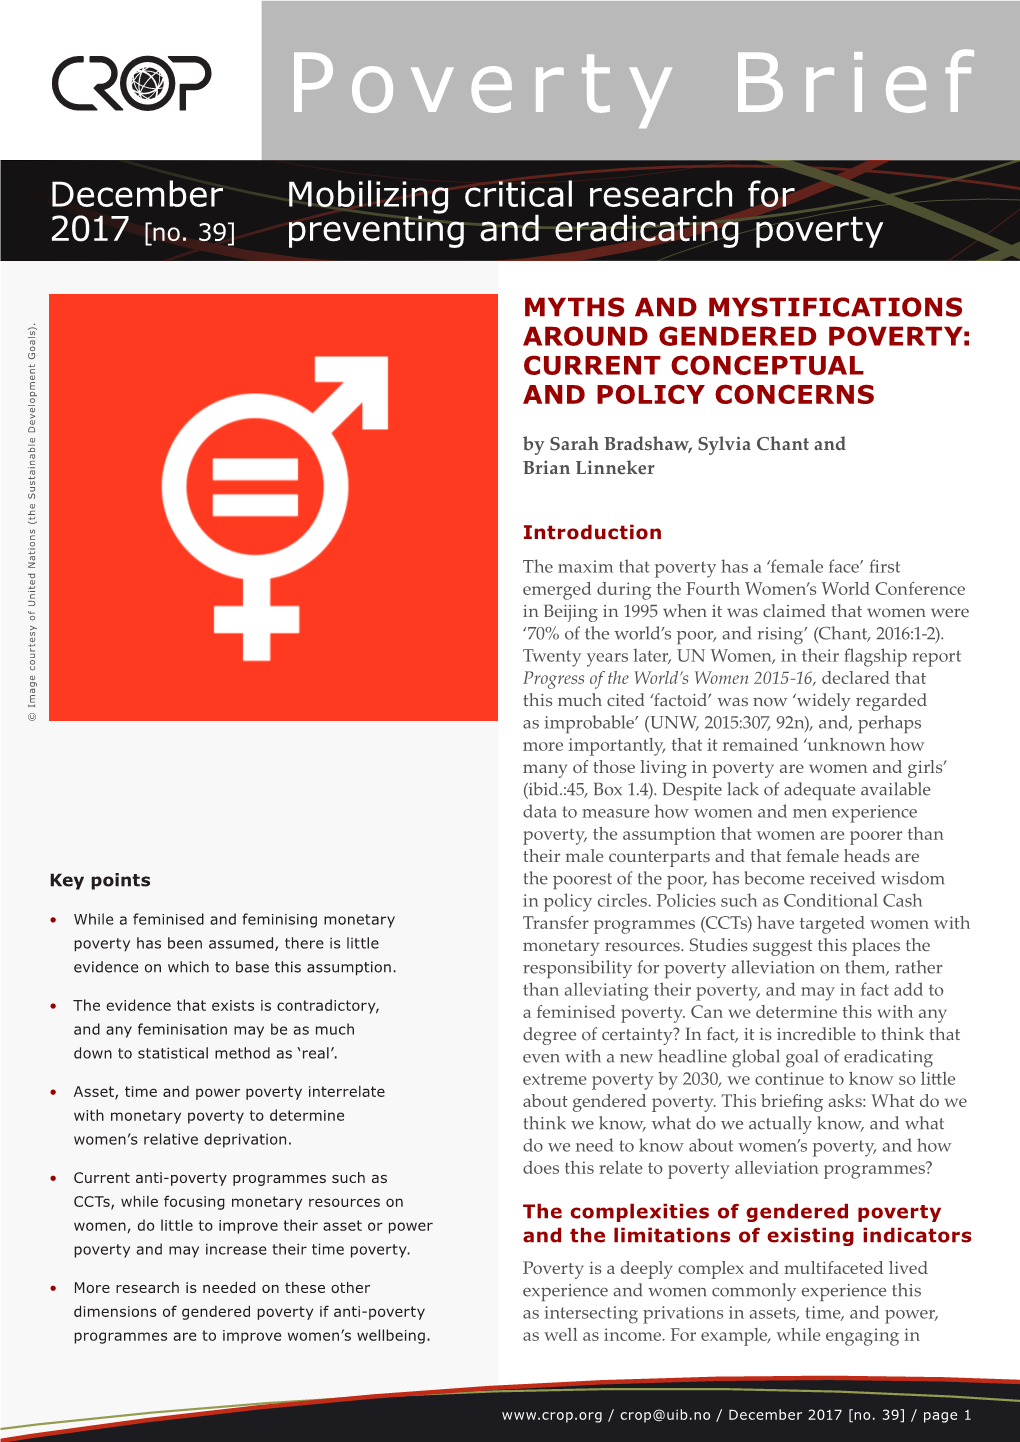 Poverty Brief 39: Myths and Mystifications Around Gendered